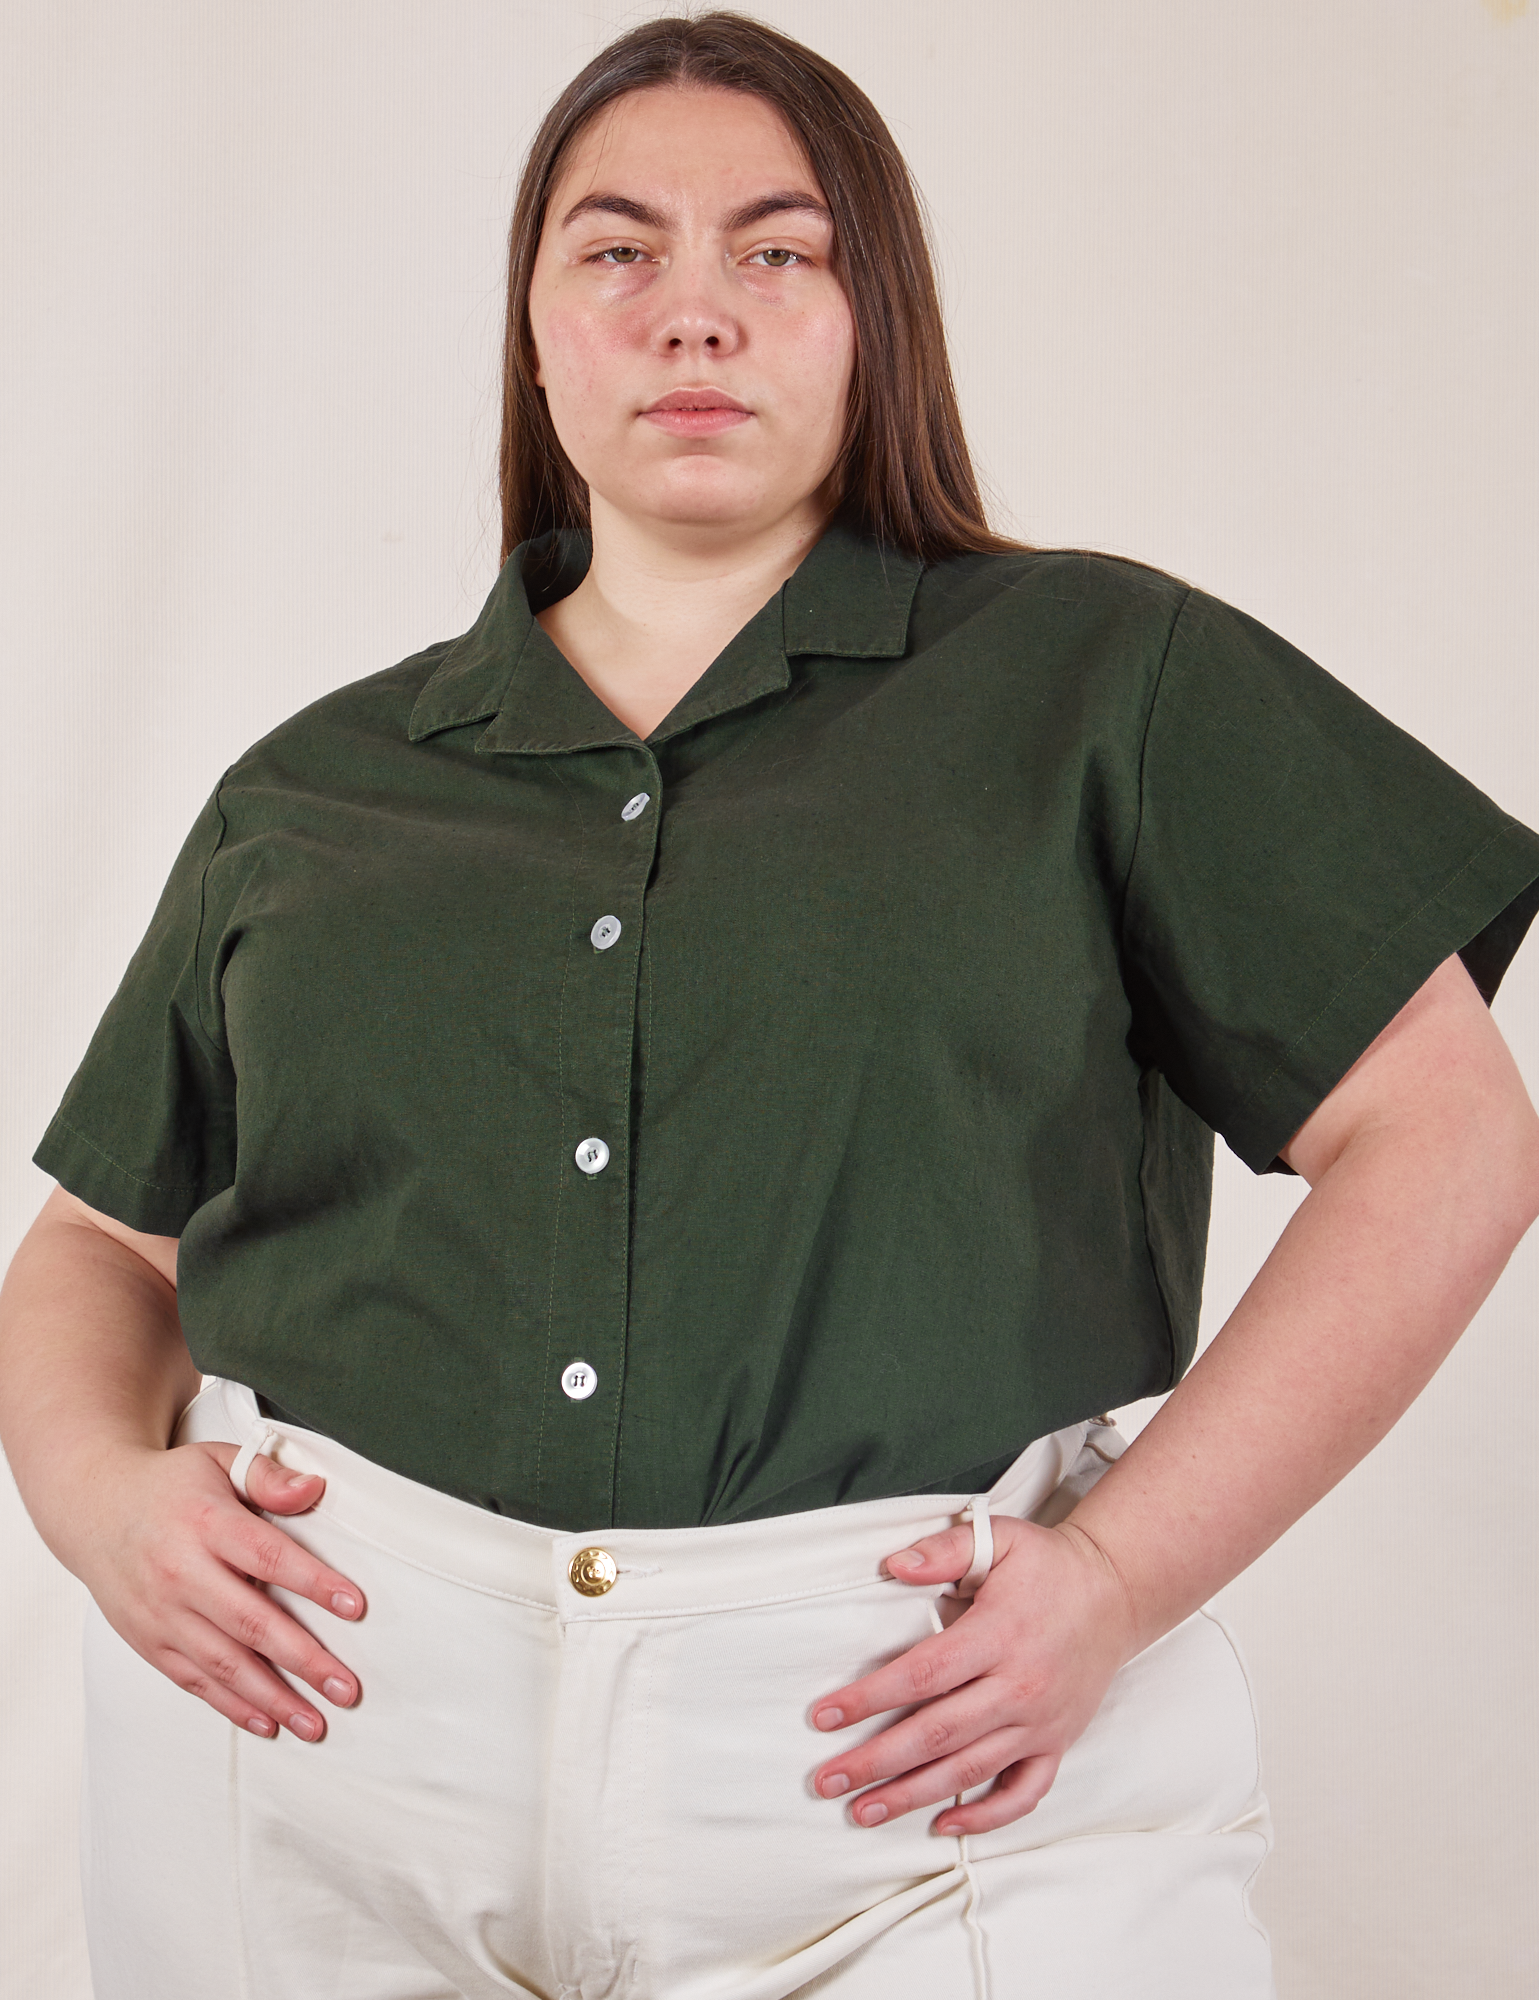 Marielena is 5&#39;8&quot; and wearing 2XL Pantry Button-Up in Swamp Green